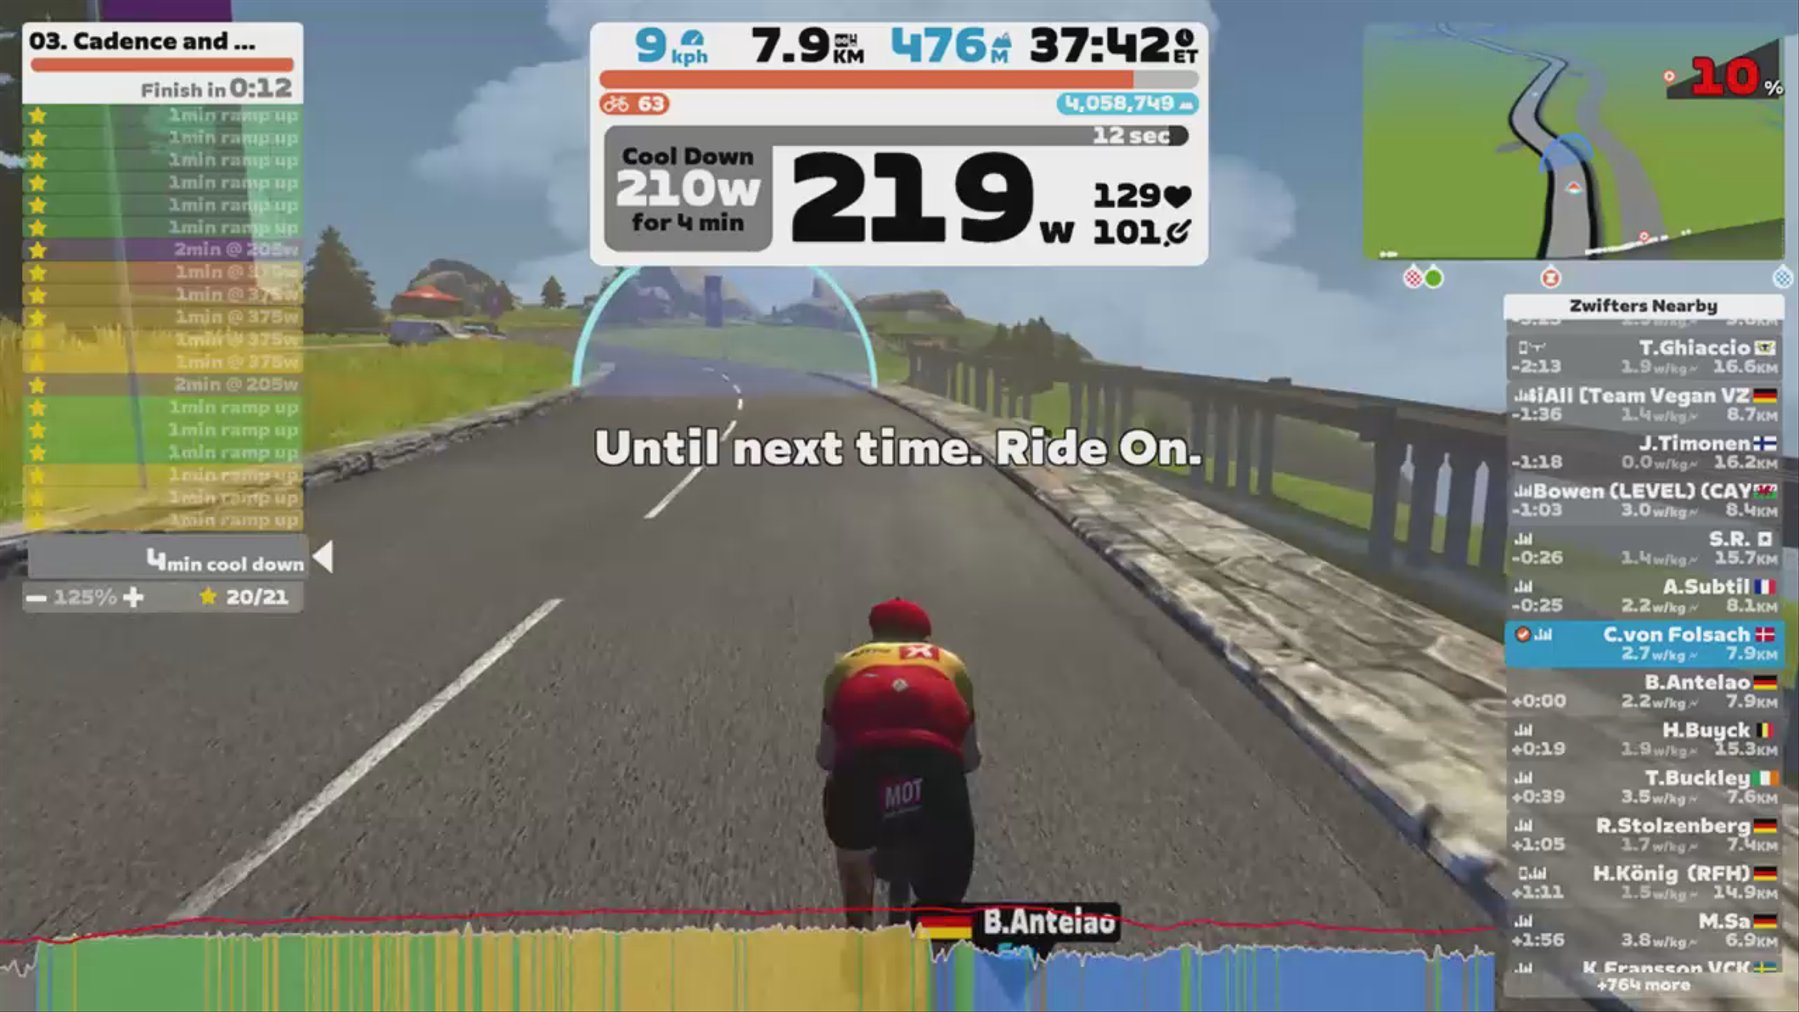 Zwift - 03. Cadence and Cruise [Lite] on Climb Portal - Volcano in France